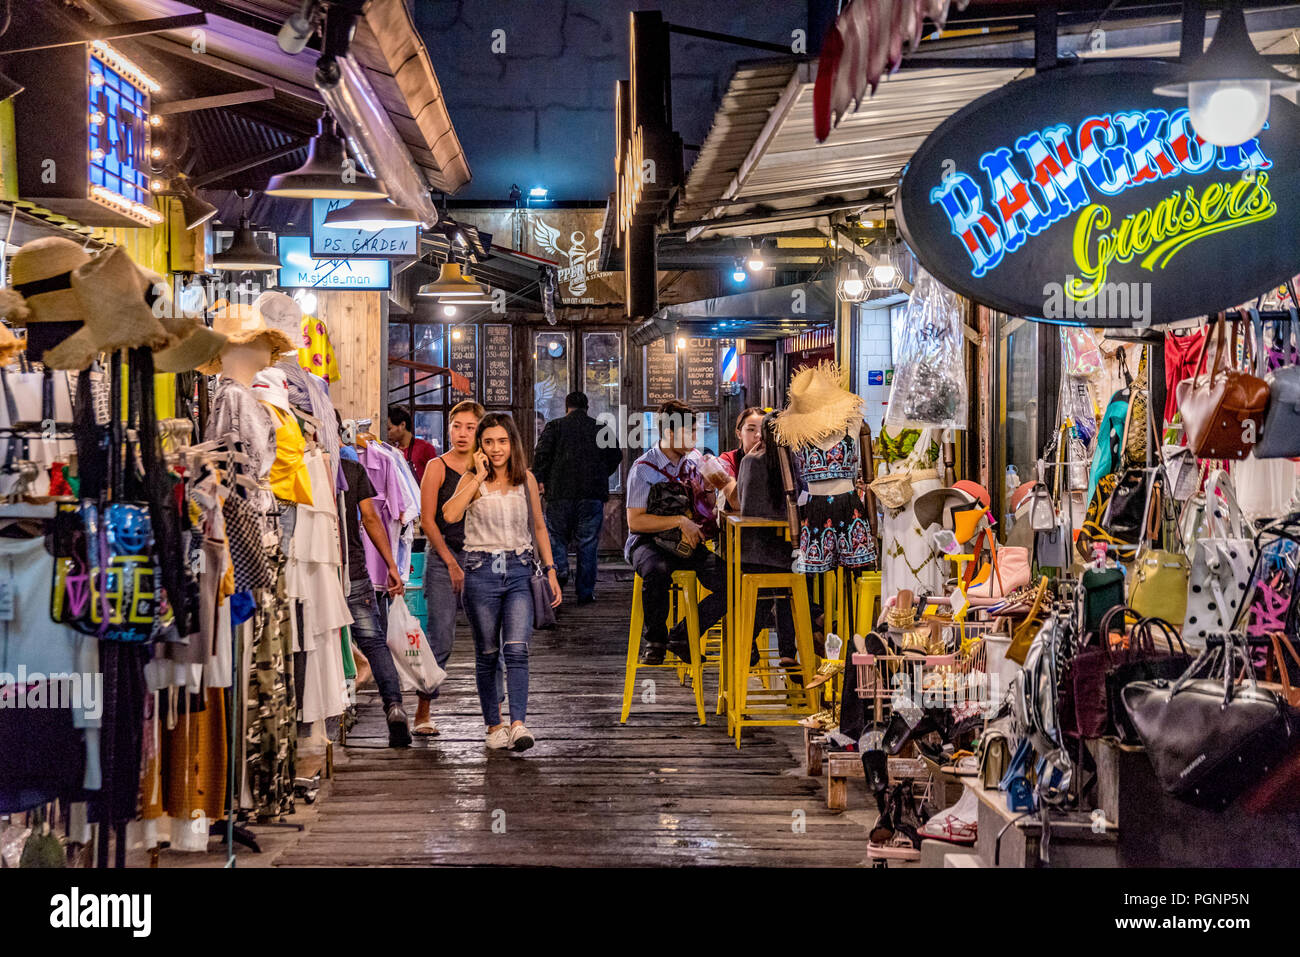 BANGKOK, THAILAND - JULY 12: Night scene of Vintage clothes shops and stalls in the famous Rod Fai night market on July 12, 2018 in Bangkok Stock Photo